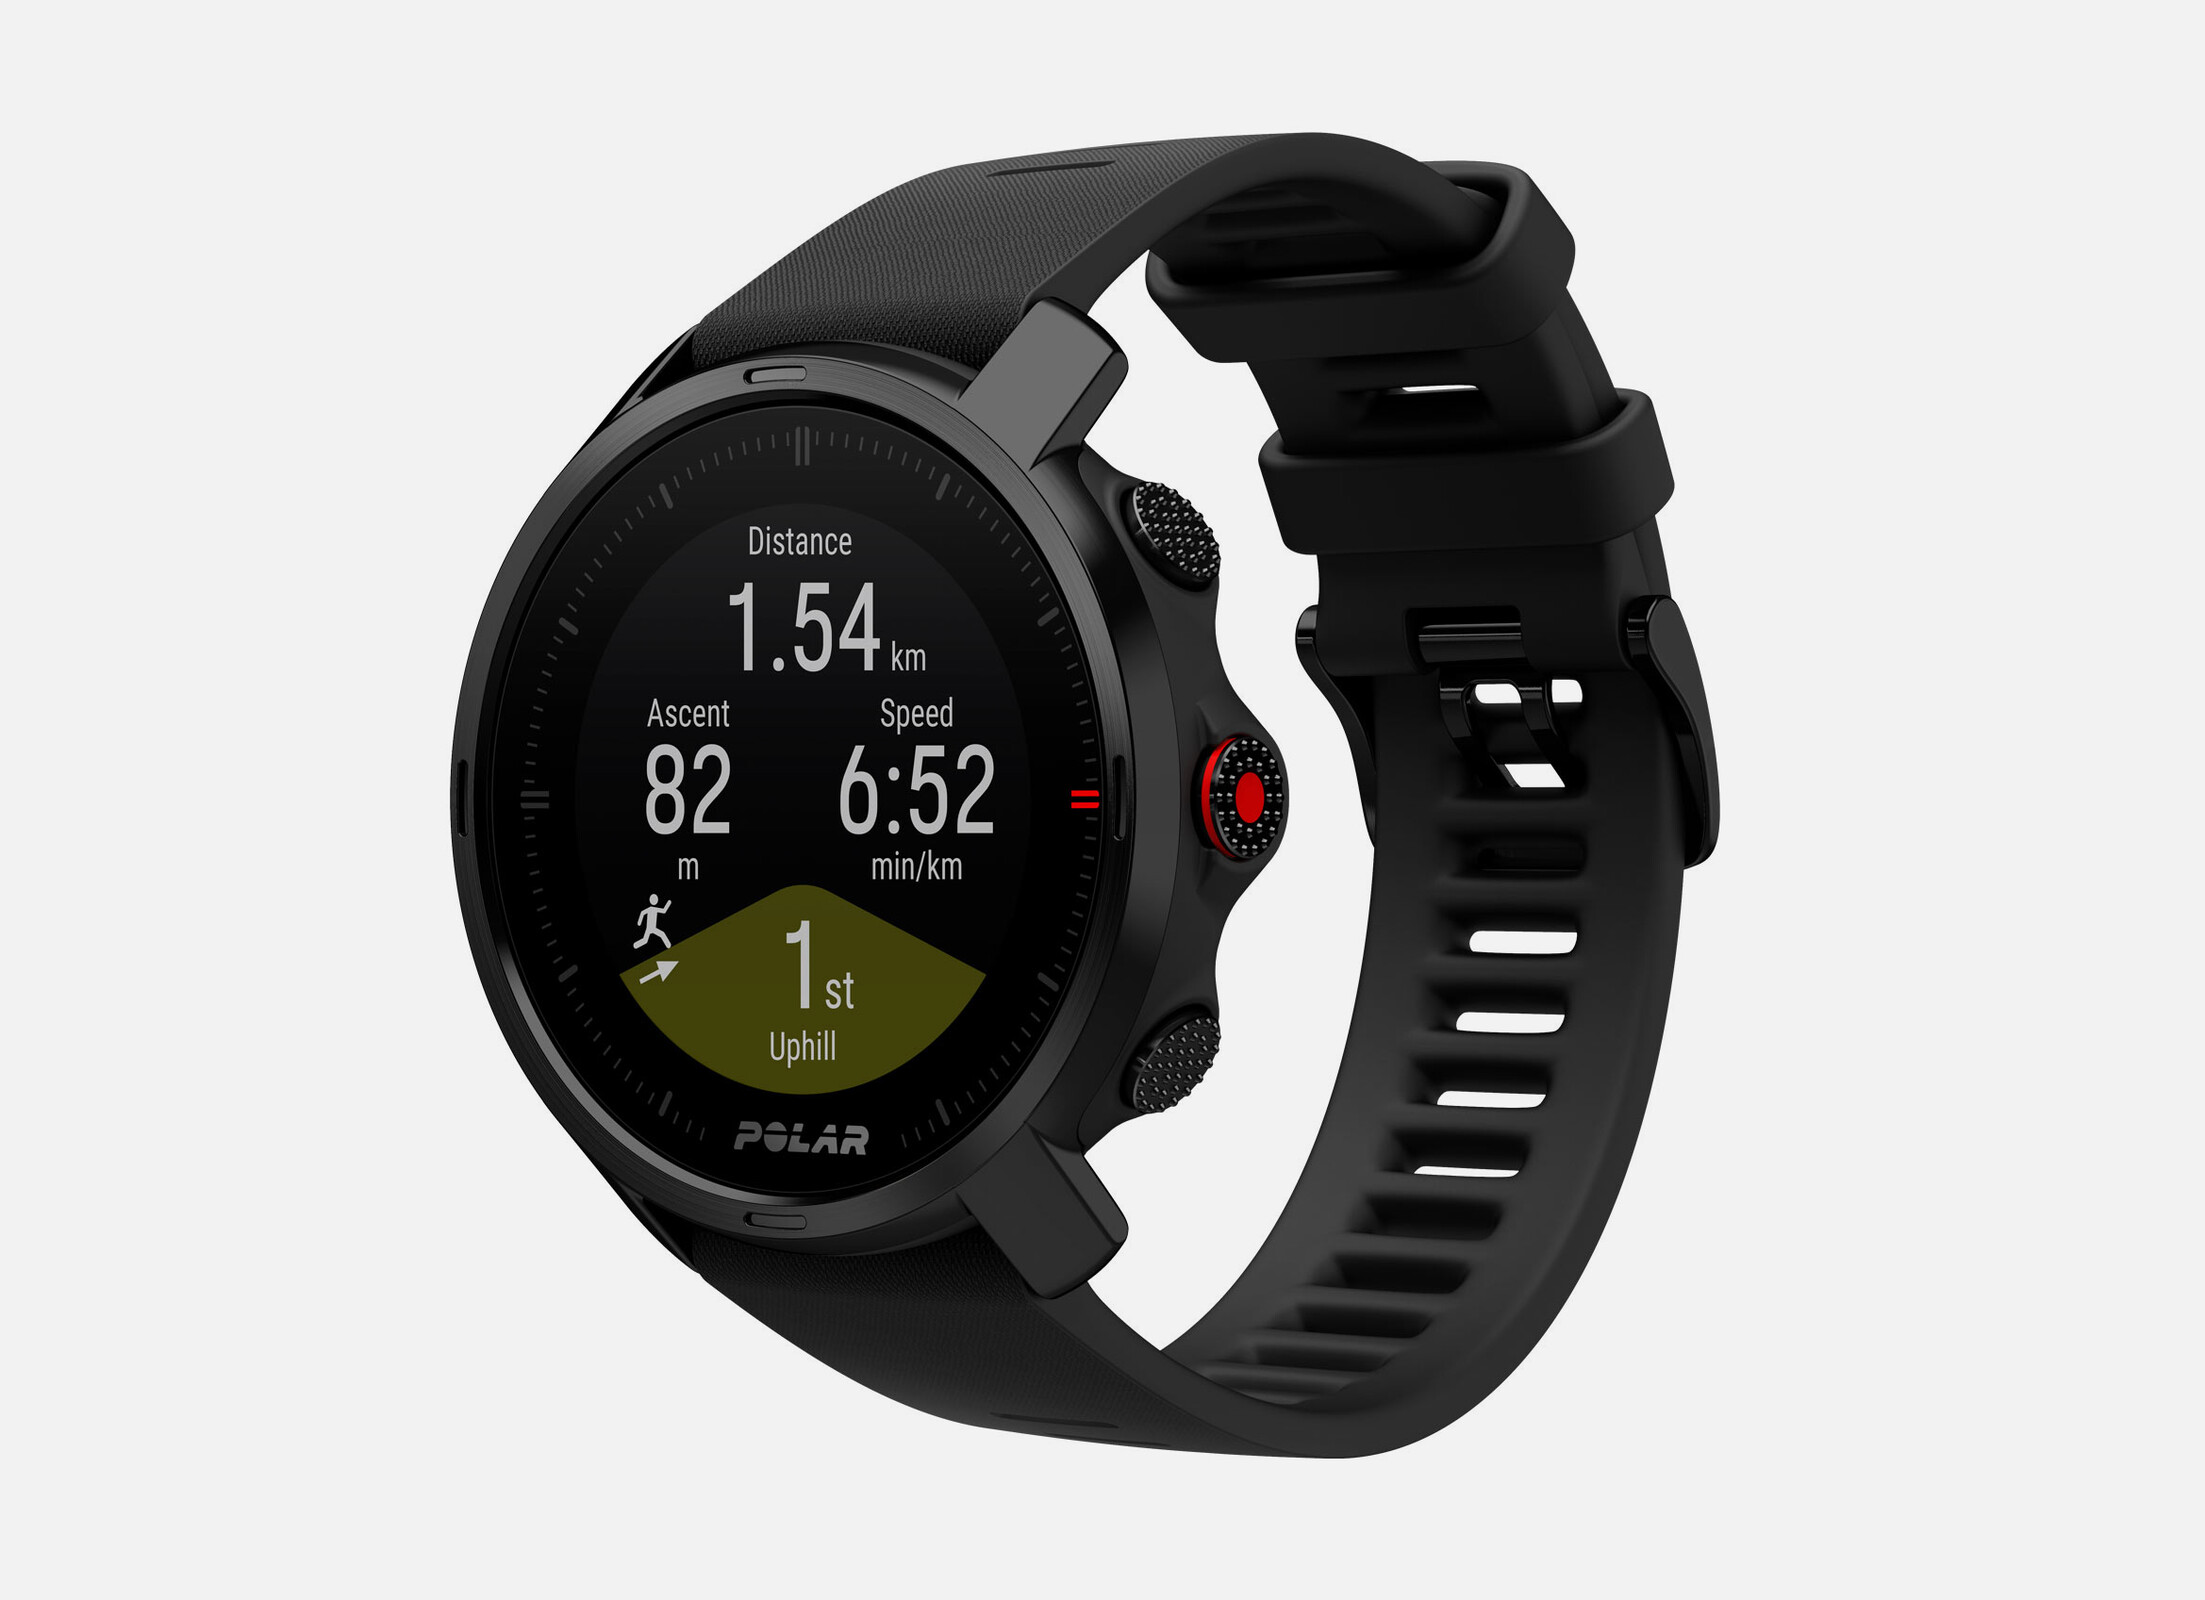 The Polar Grit X smartwatch receives unique aspects from the Grit X Pro with firmware 2.0.12 replace